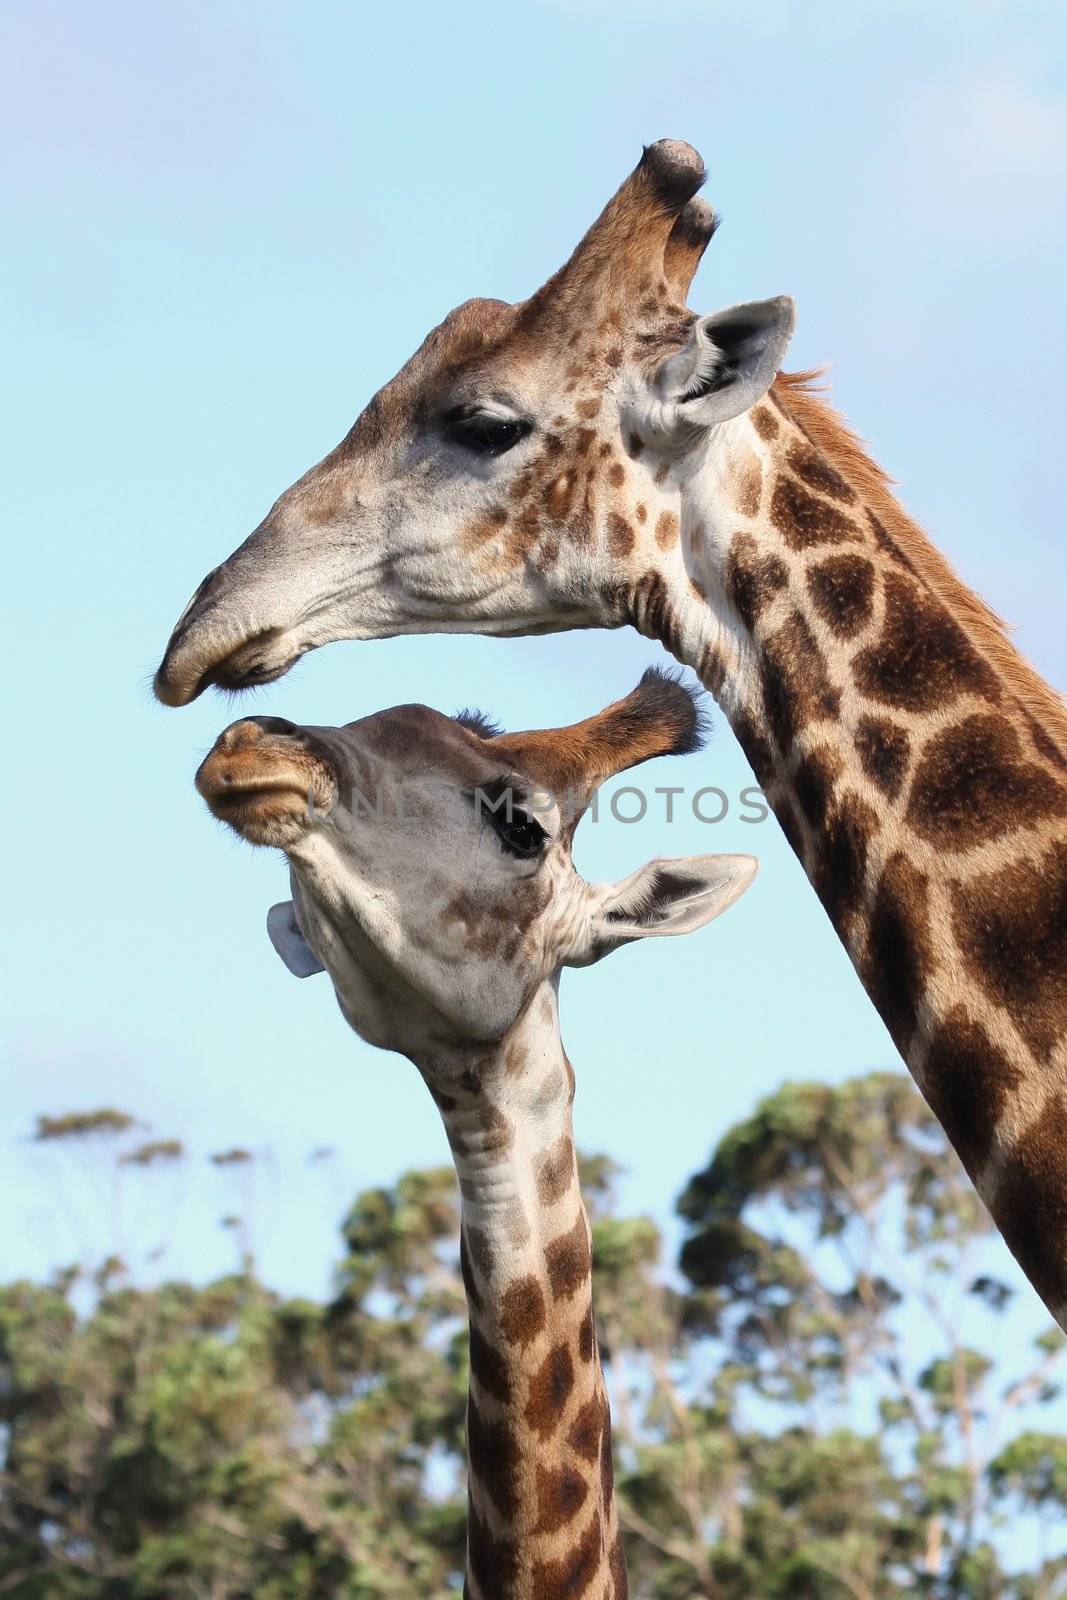 Two giraffes from Africa showing some affection